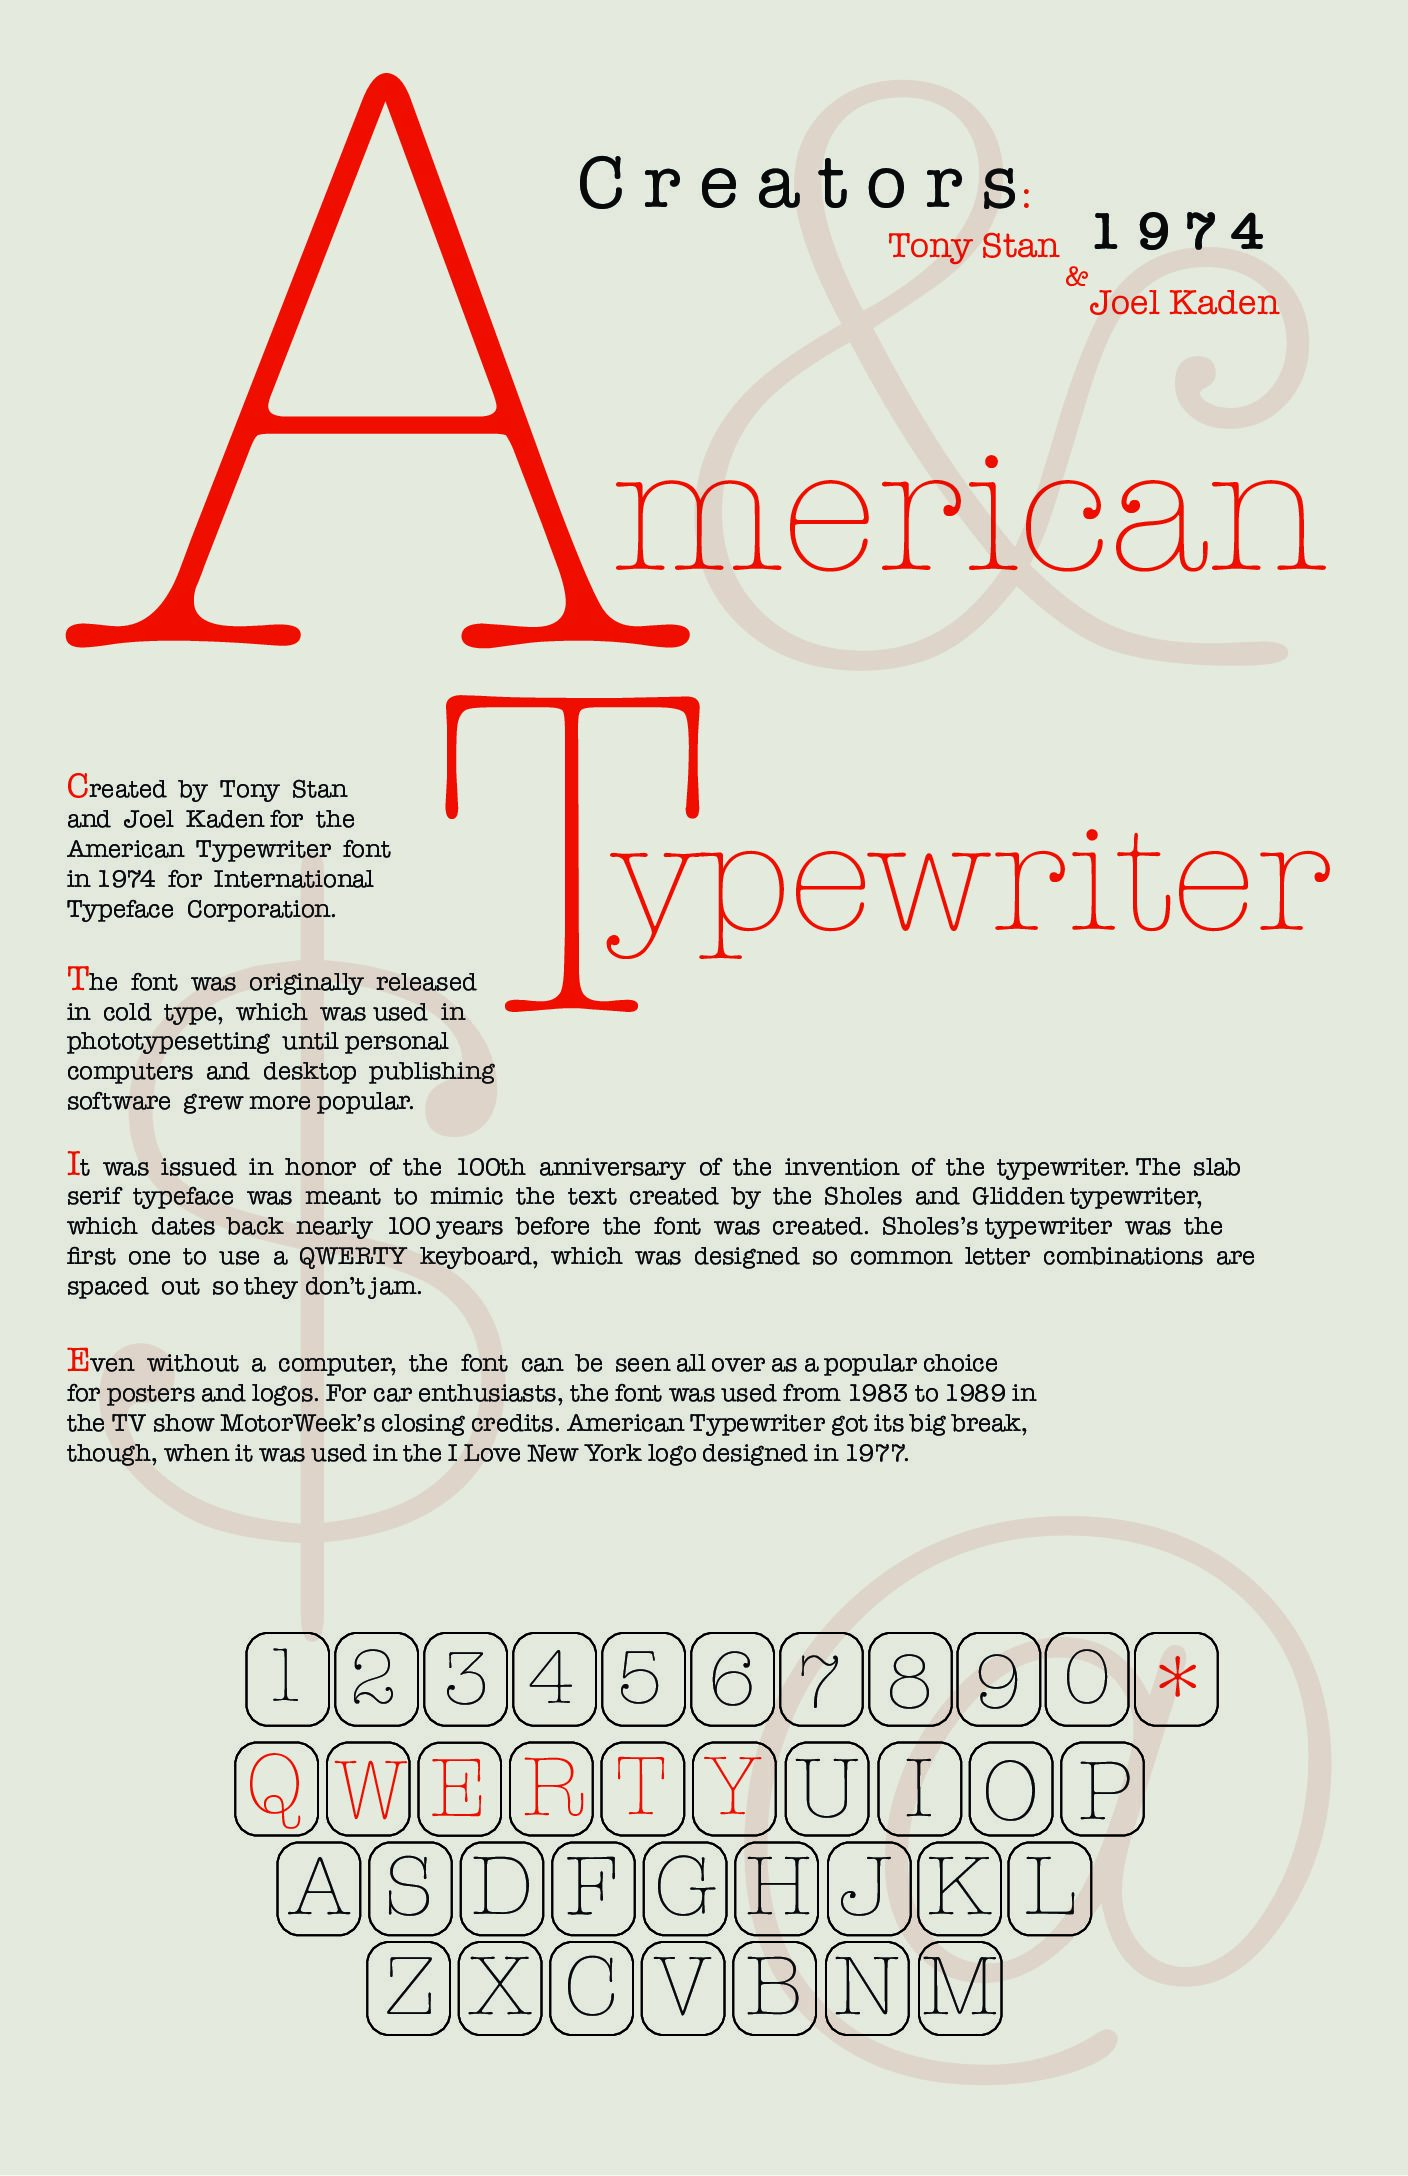 Type Poster